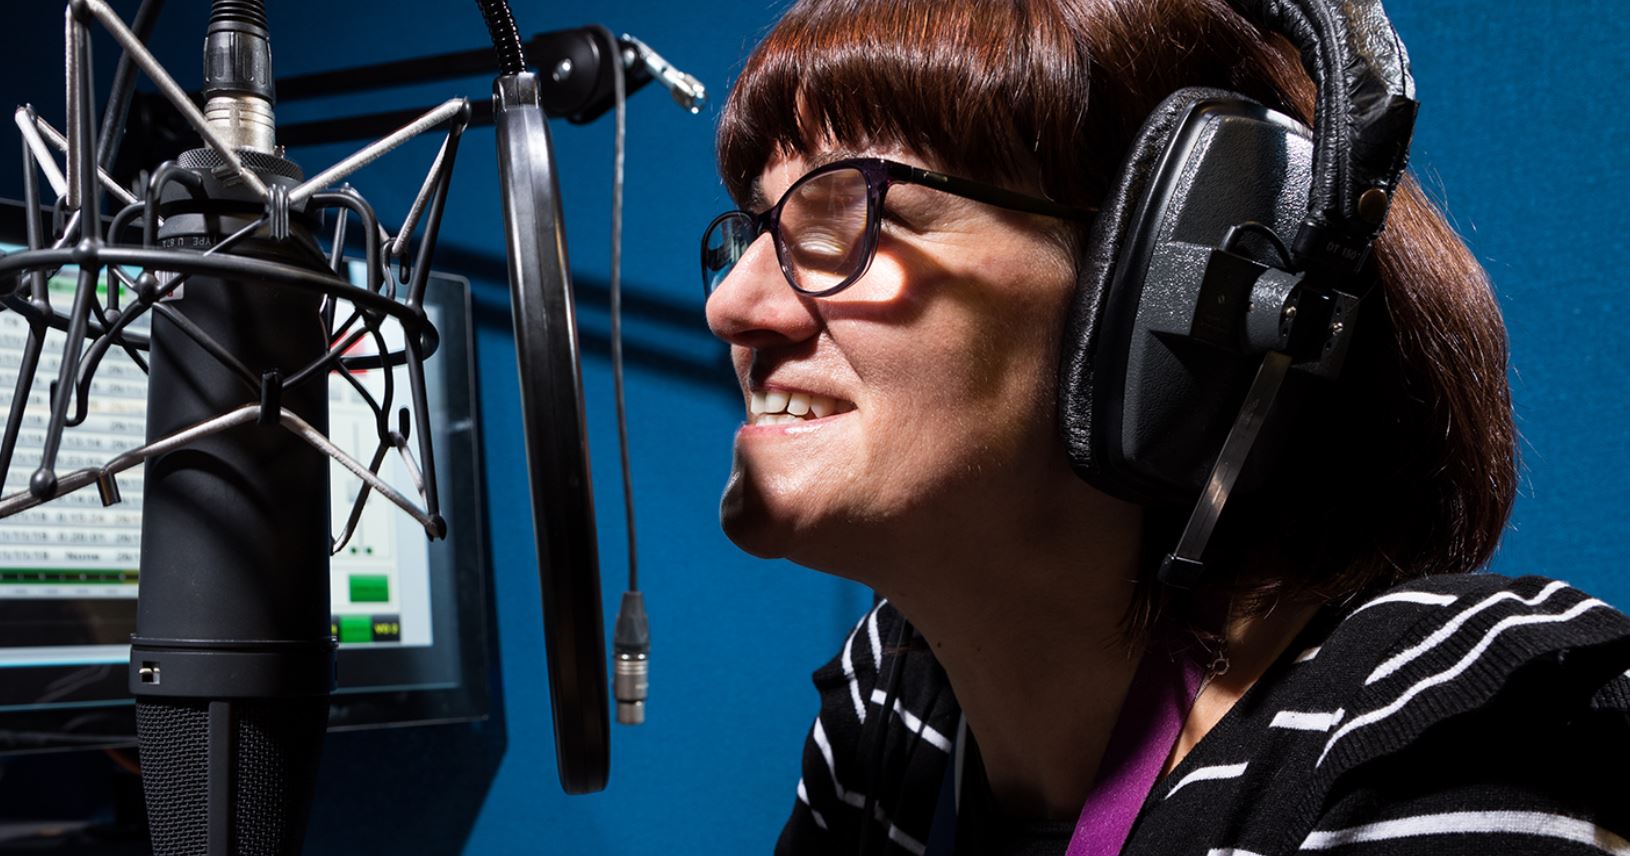 Corie Brown, from Channel 4, speaks into a microphone in a sound booth